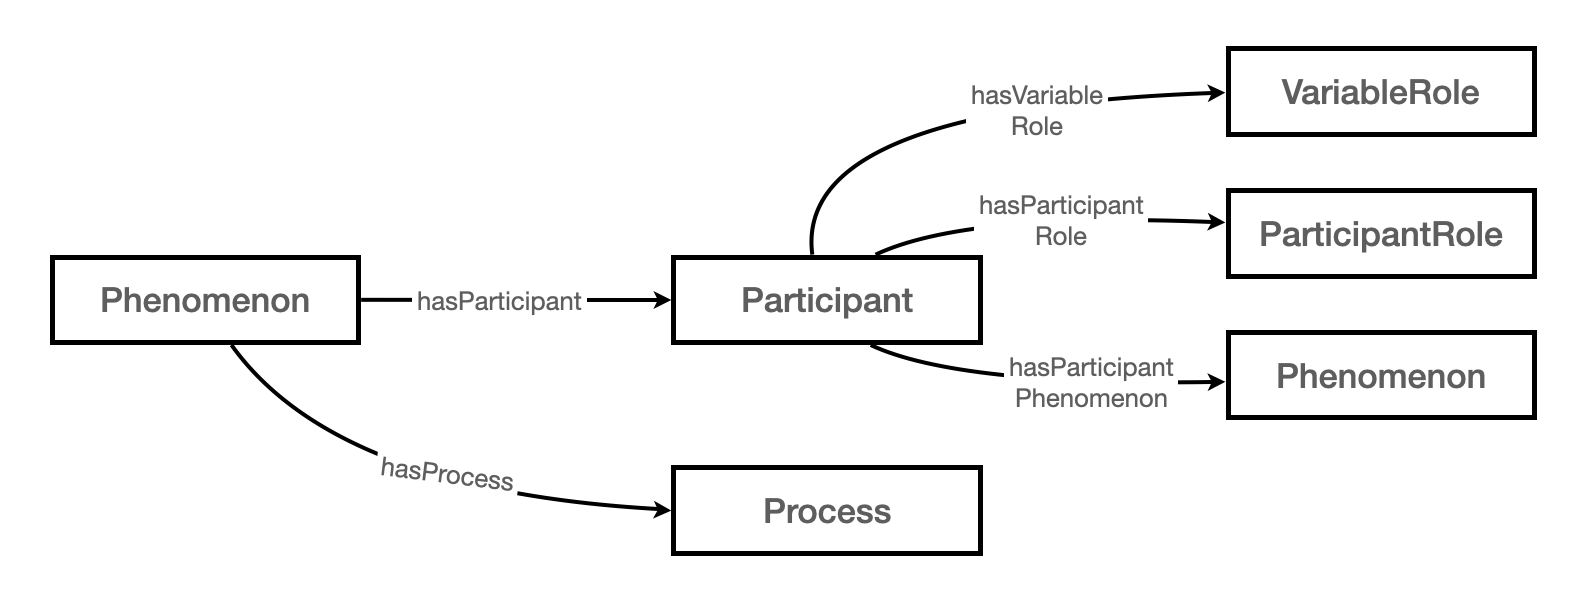 diagram showing how phenomenon is decomposed into participants with participant and variable roles and processes